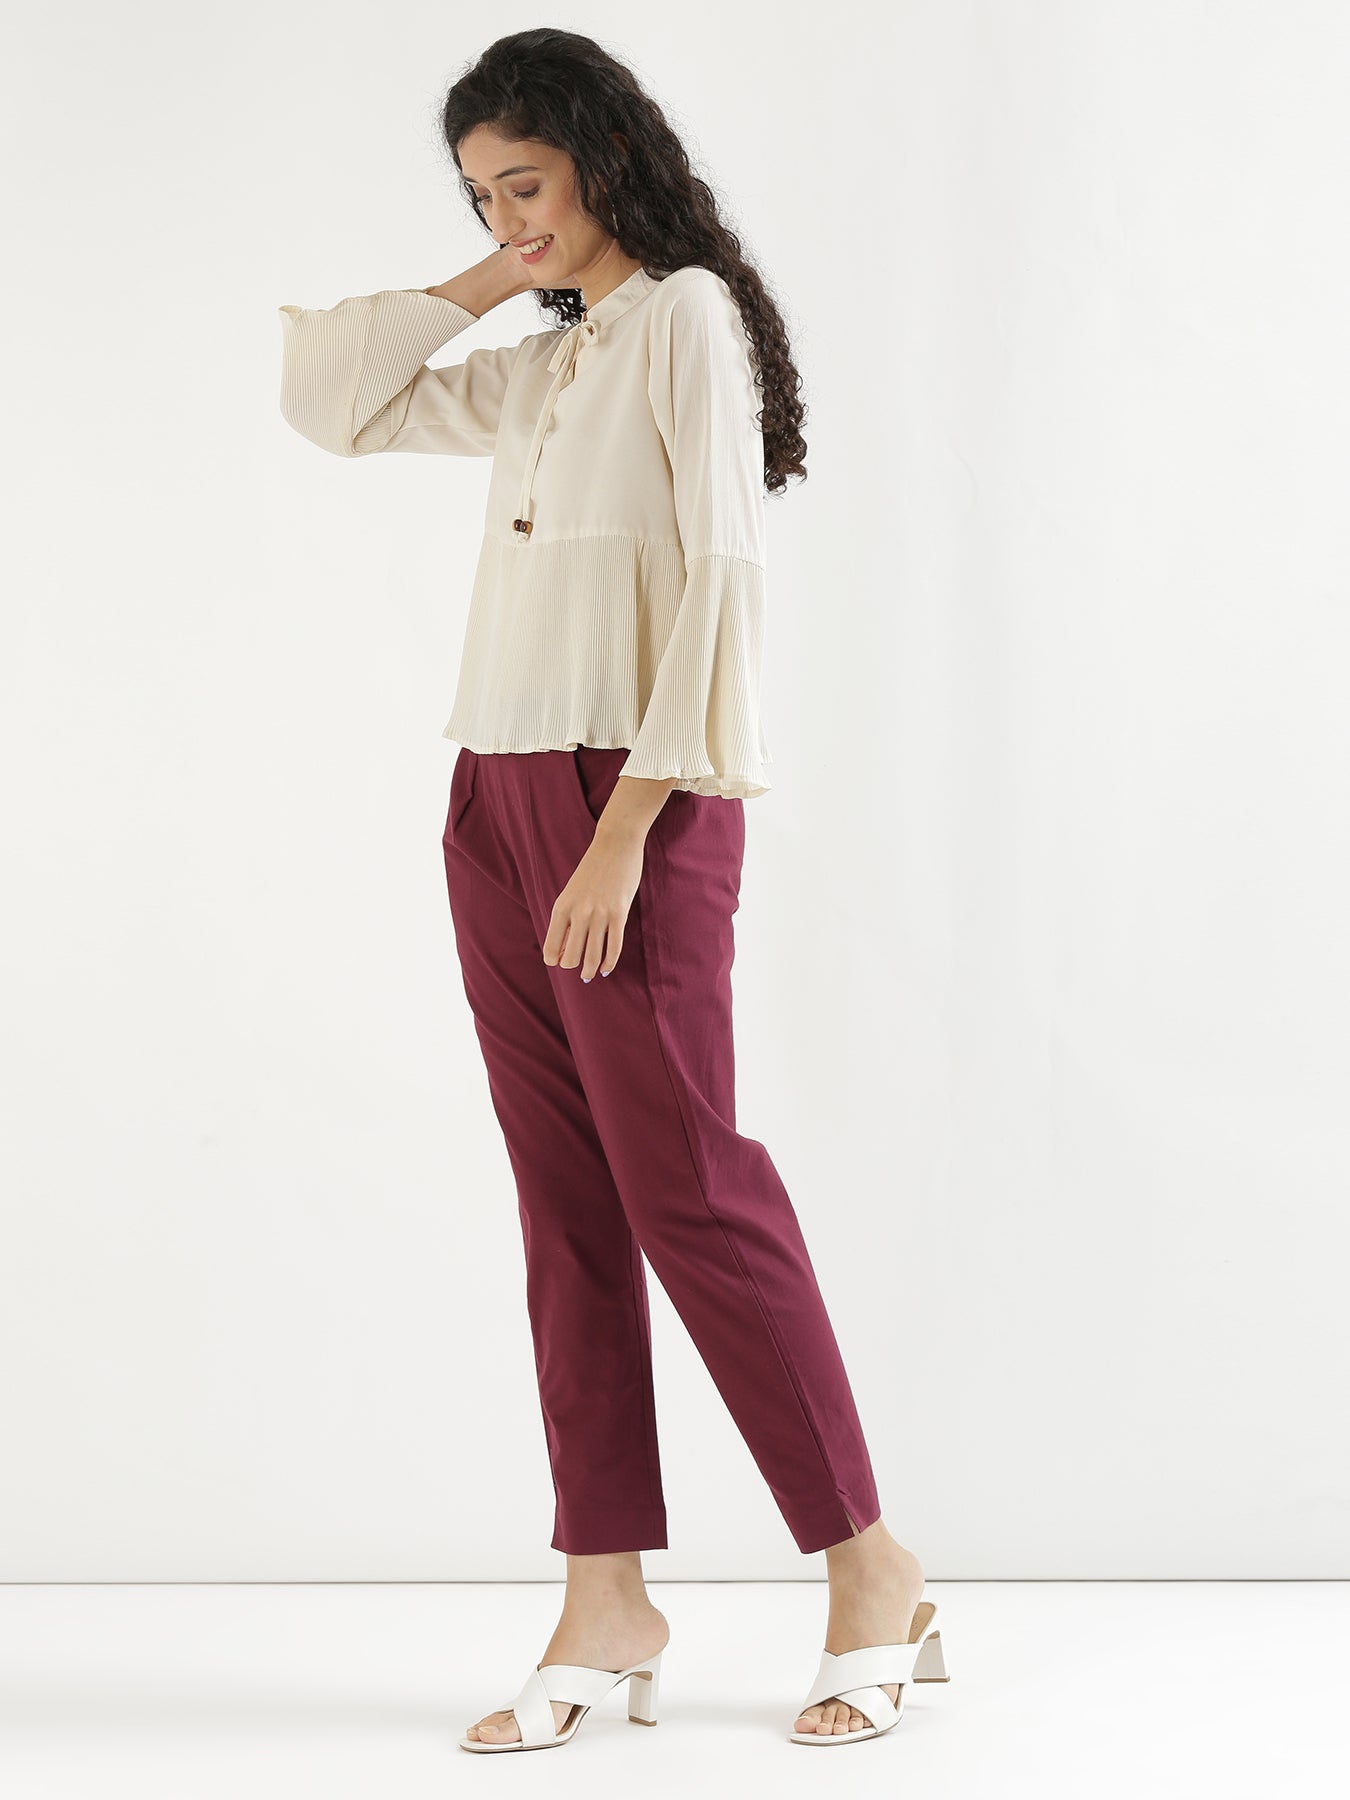 Wide-Leg Trousers Four Ways for Work - Pumps & Push Ups | Wide leg trousers  outfit, Wide leg pants outfit work, Wide leg outfit